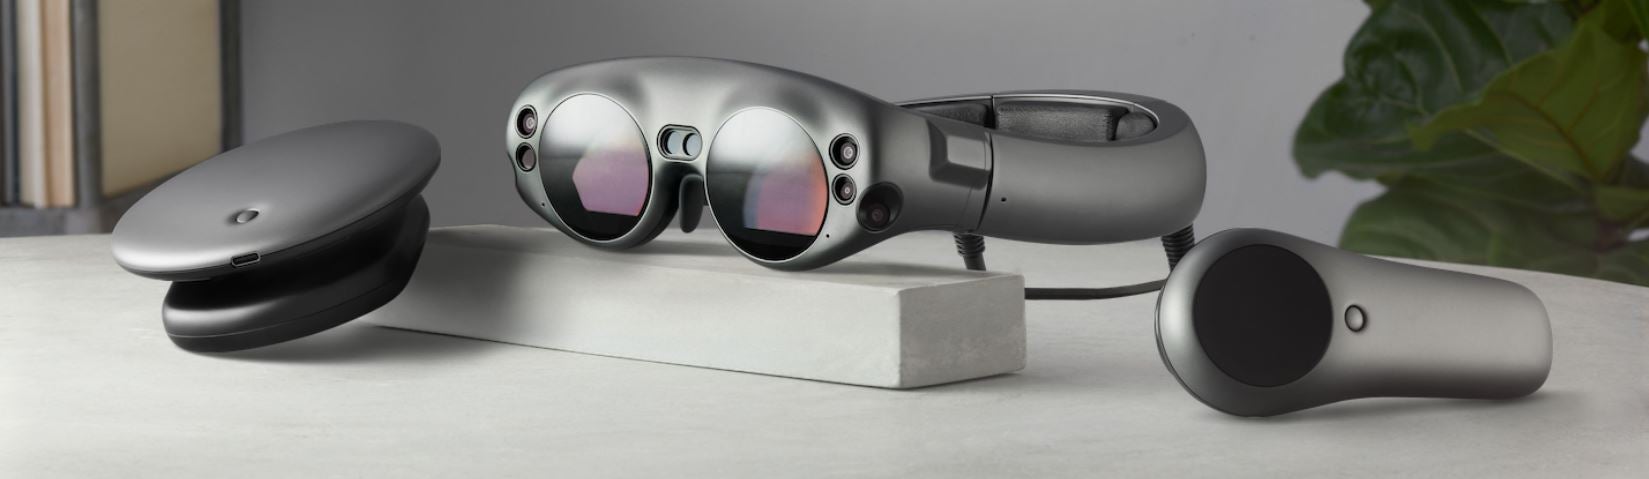 Magic Leap Coming this Summer! Yet Company Can't Show Live Demo